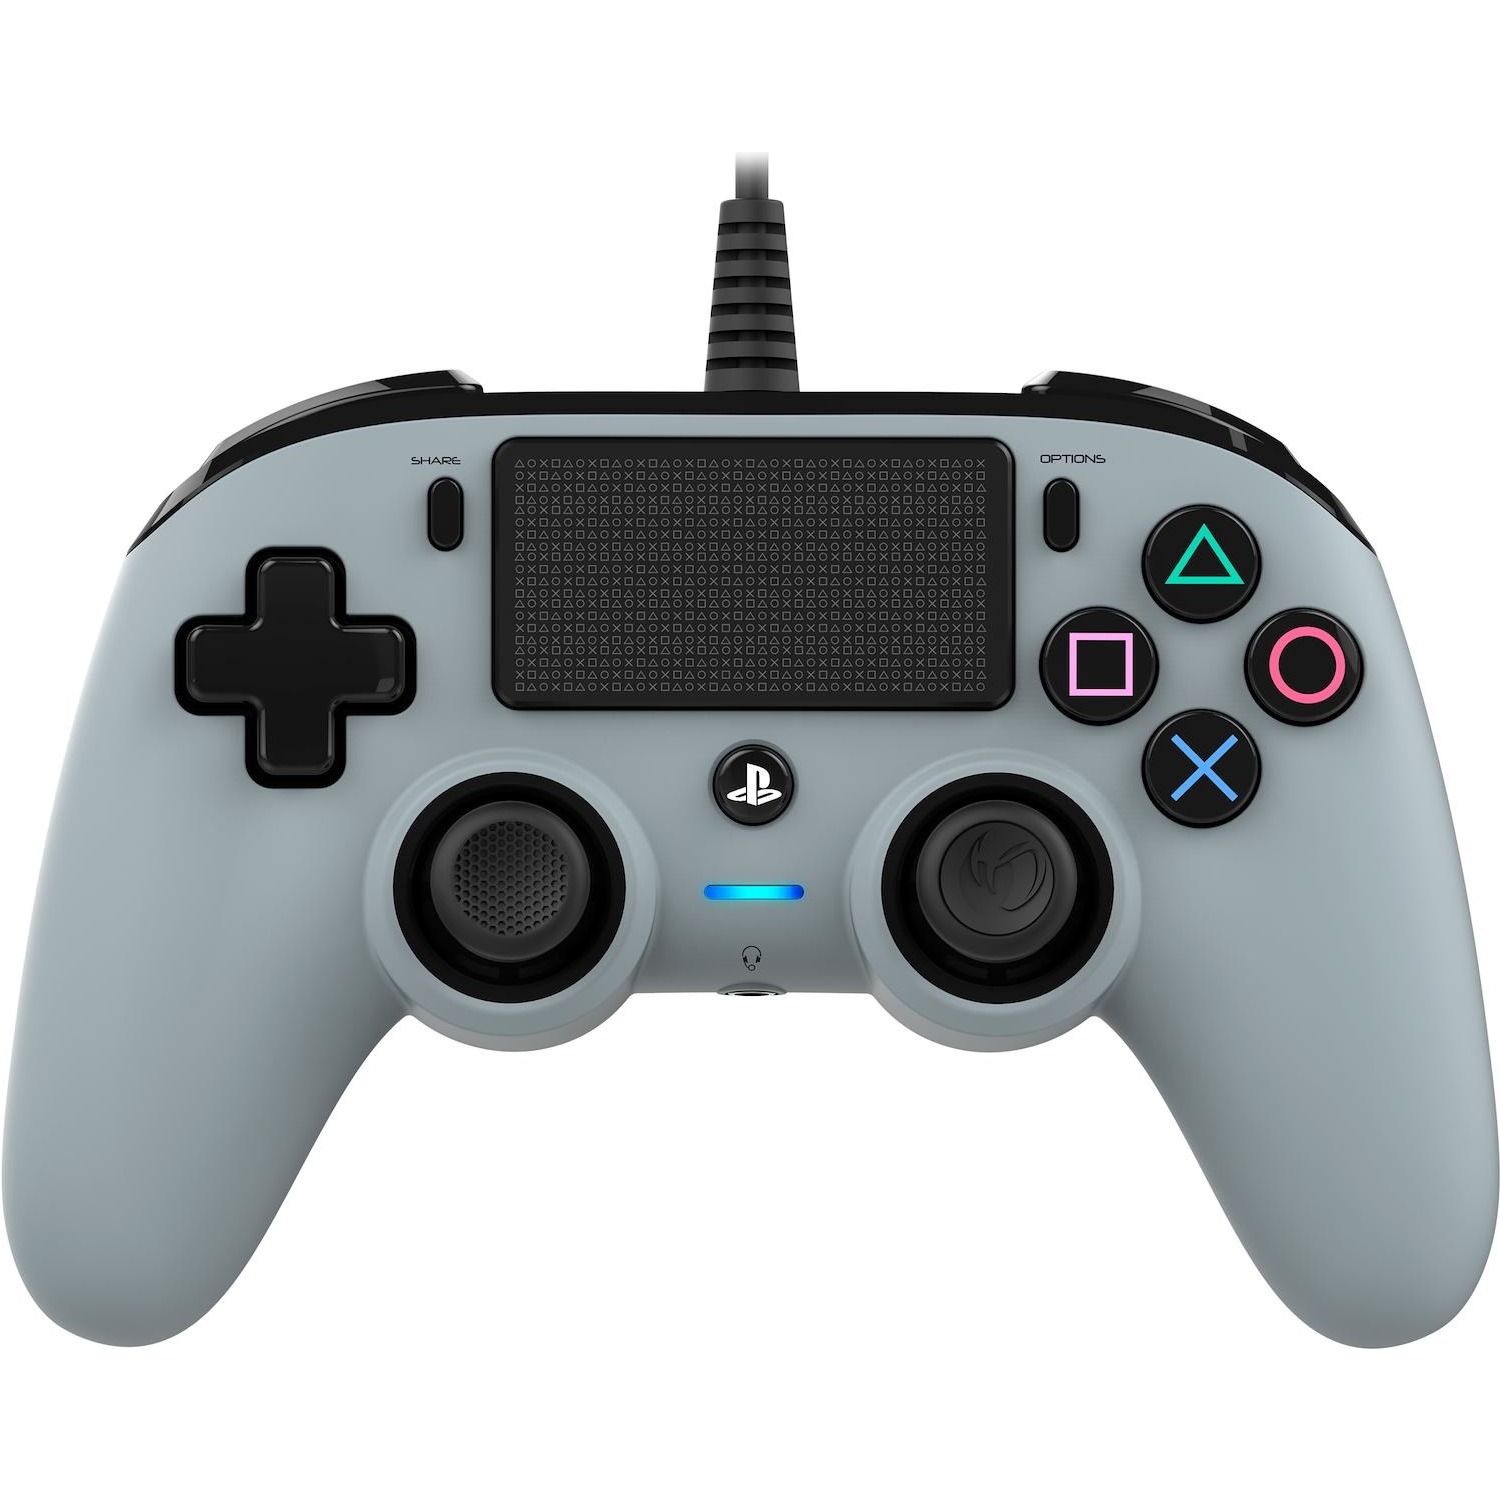 Nacon PS4 Pad Compact Controller grey wired - DIMOStore